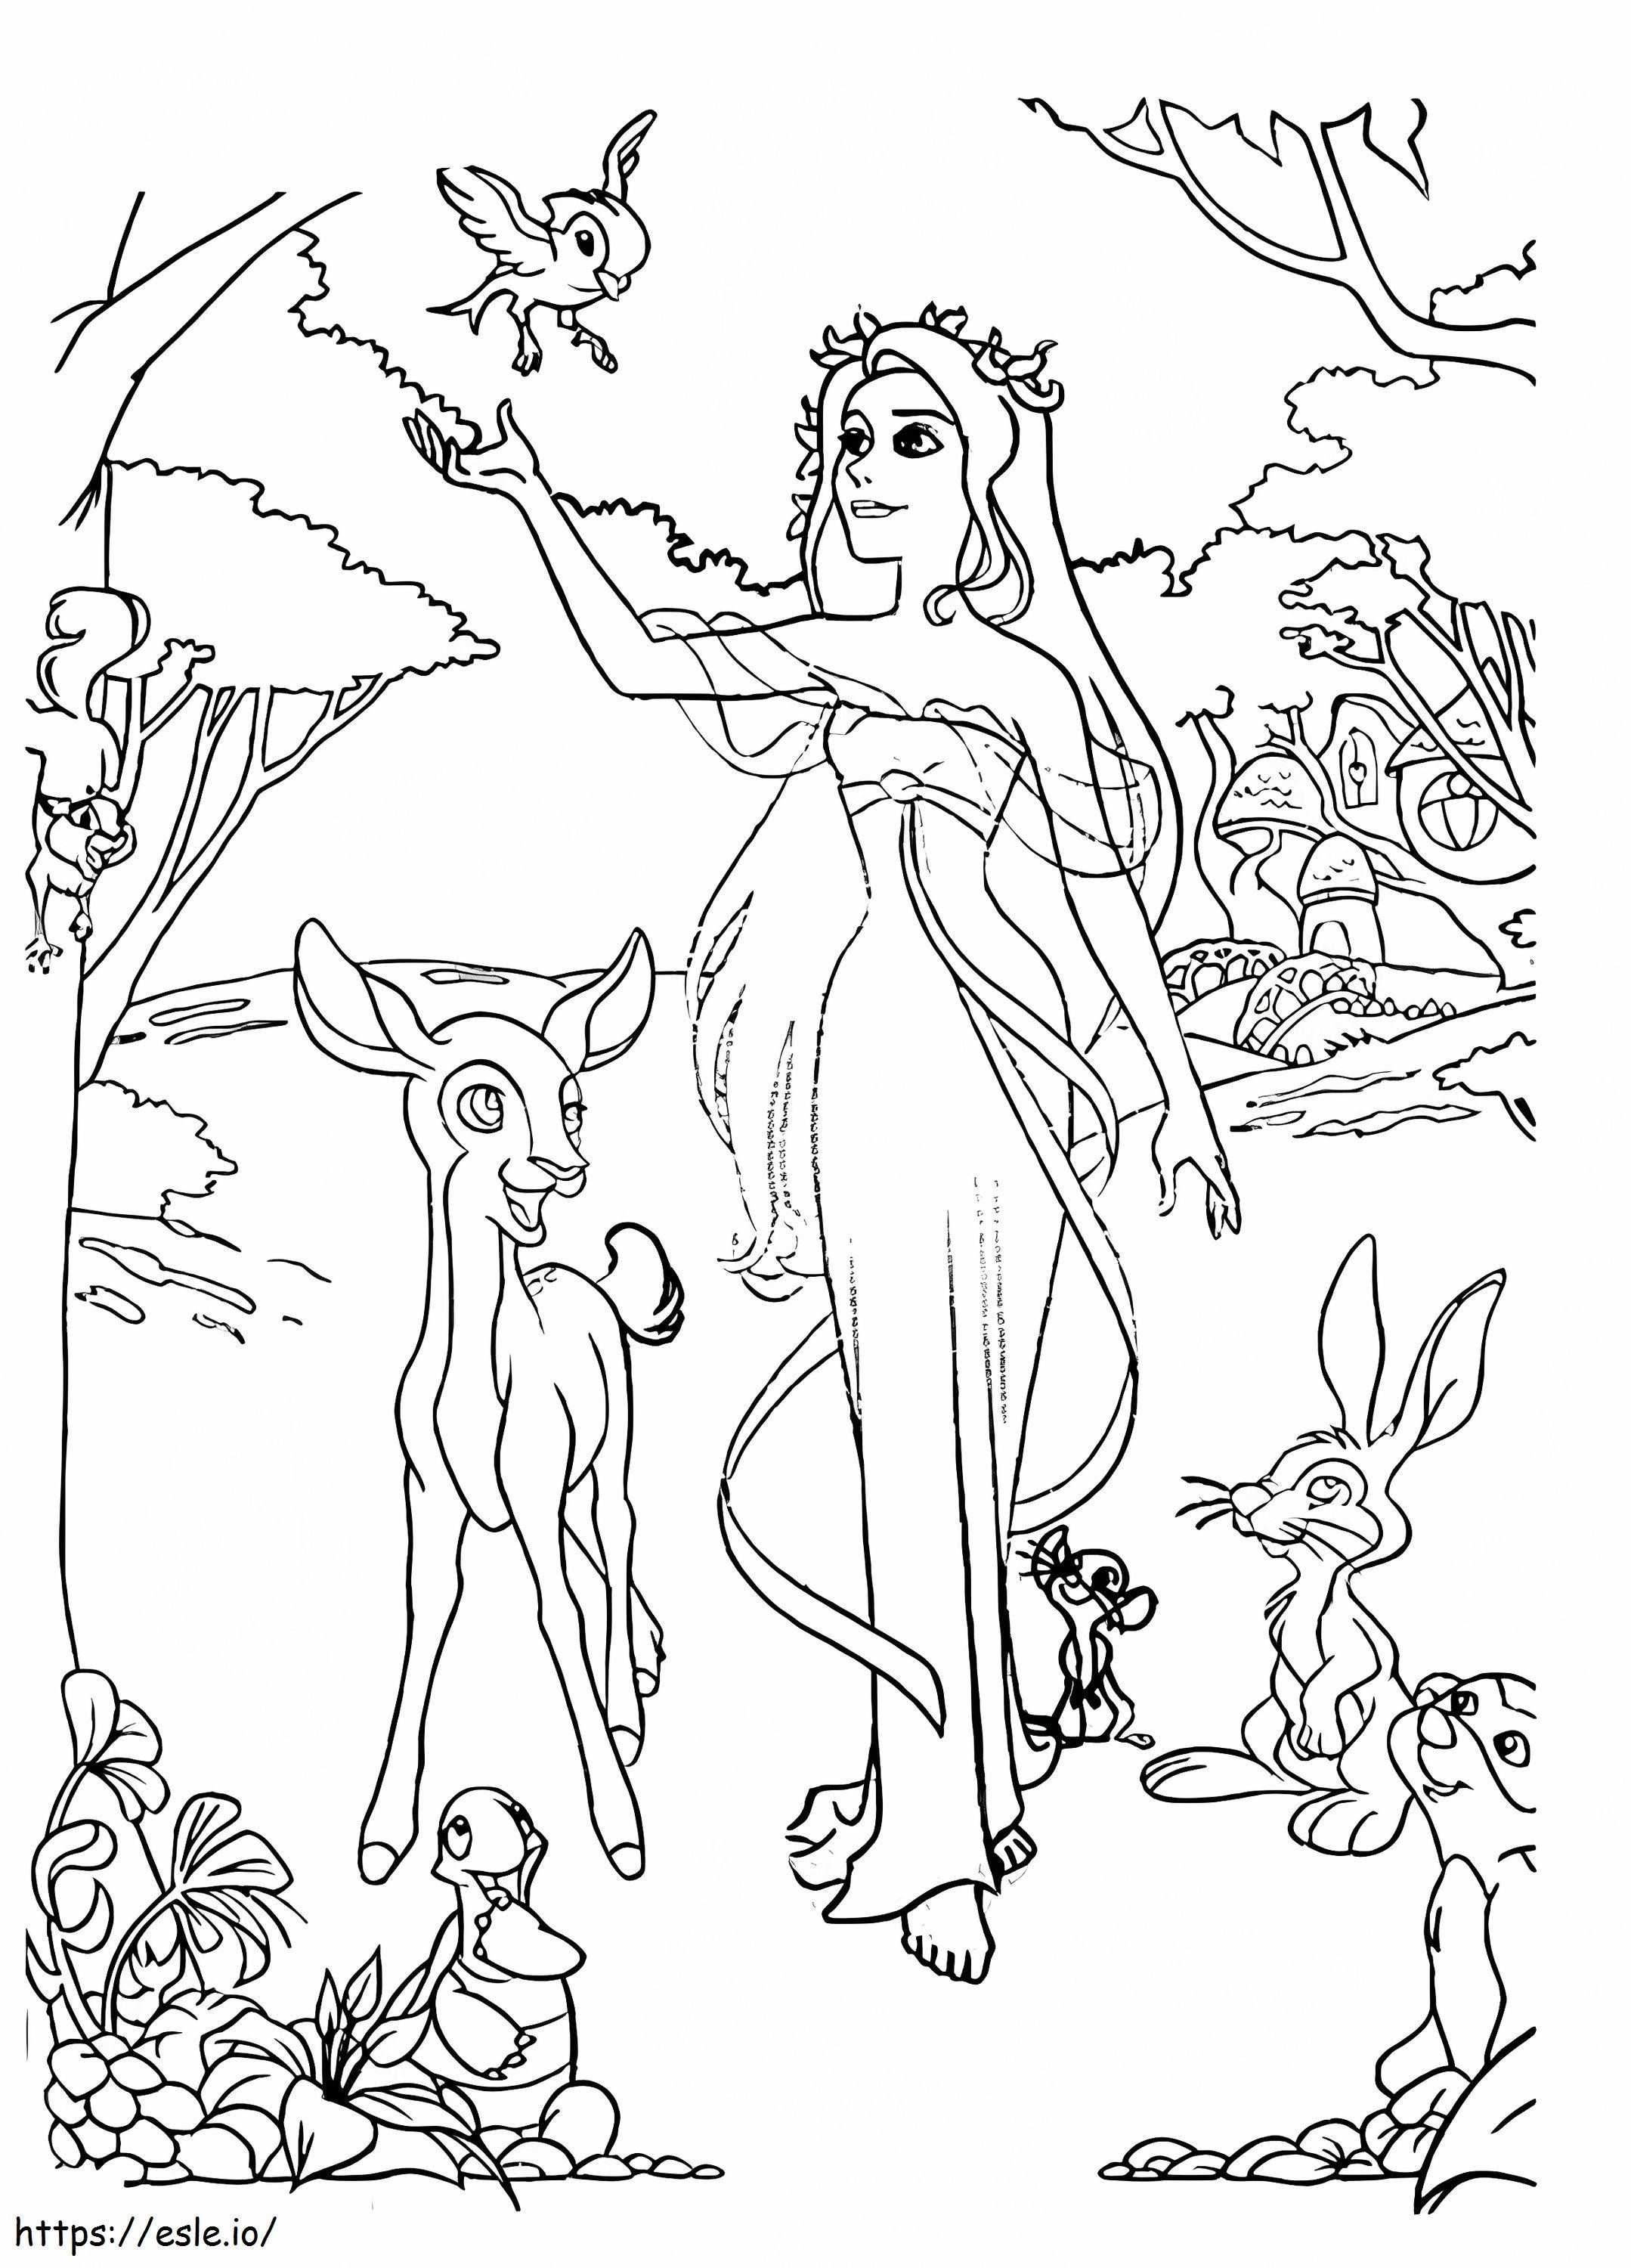 Giselle Y Animal coloring page